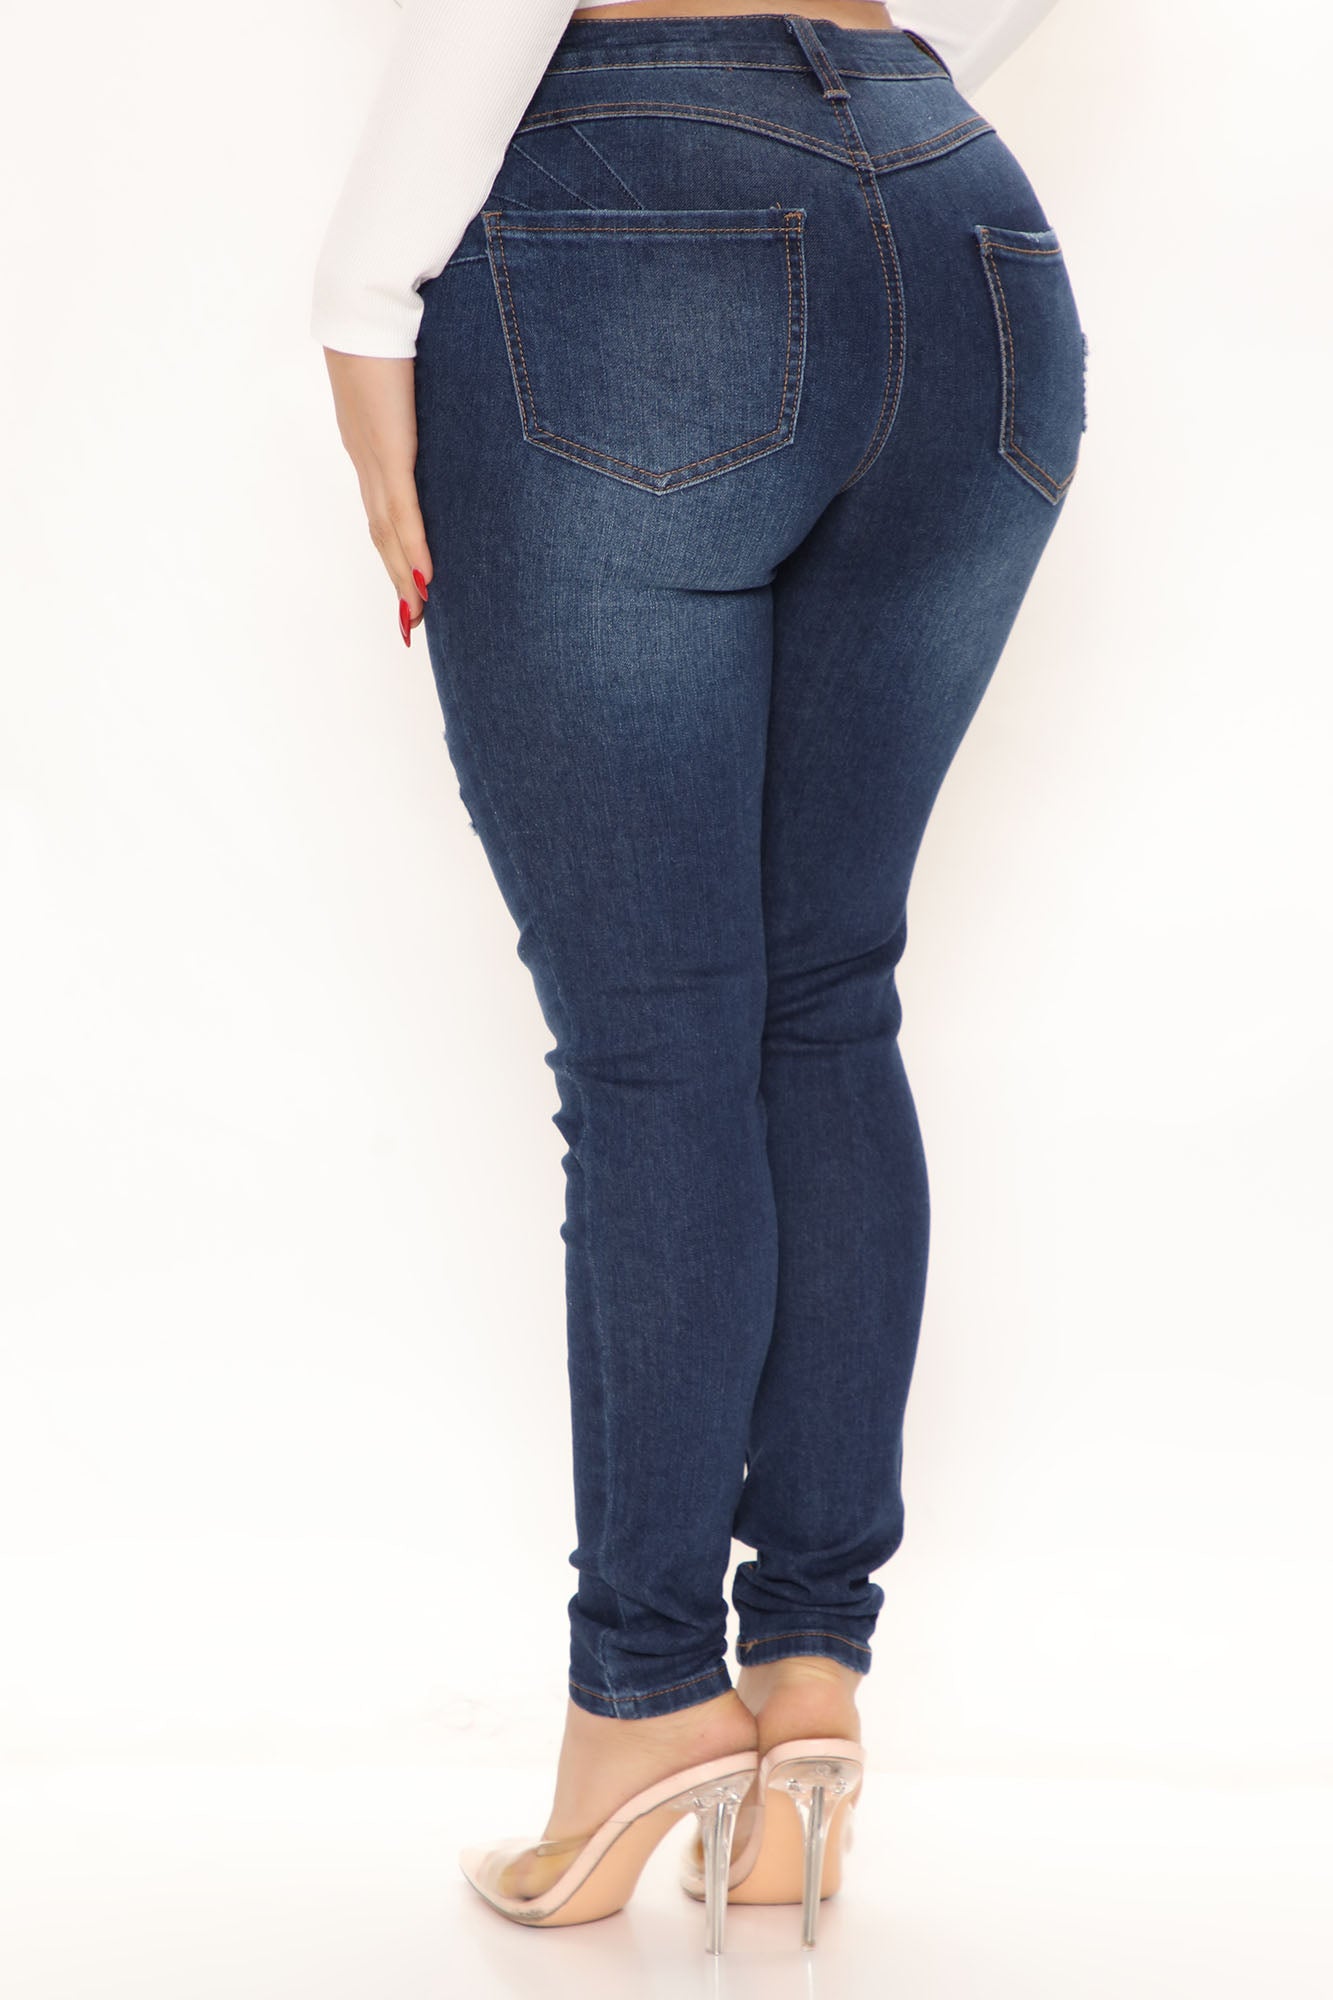 Say Less Booty Lifting Skinny Jeans - Dark Wash Ins Street